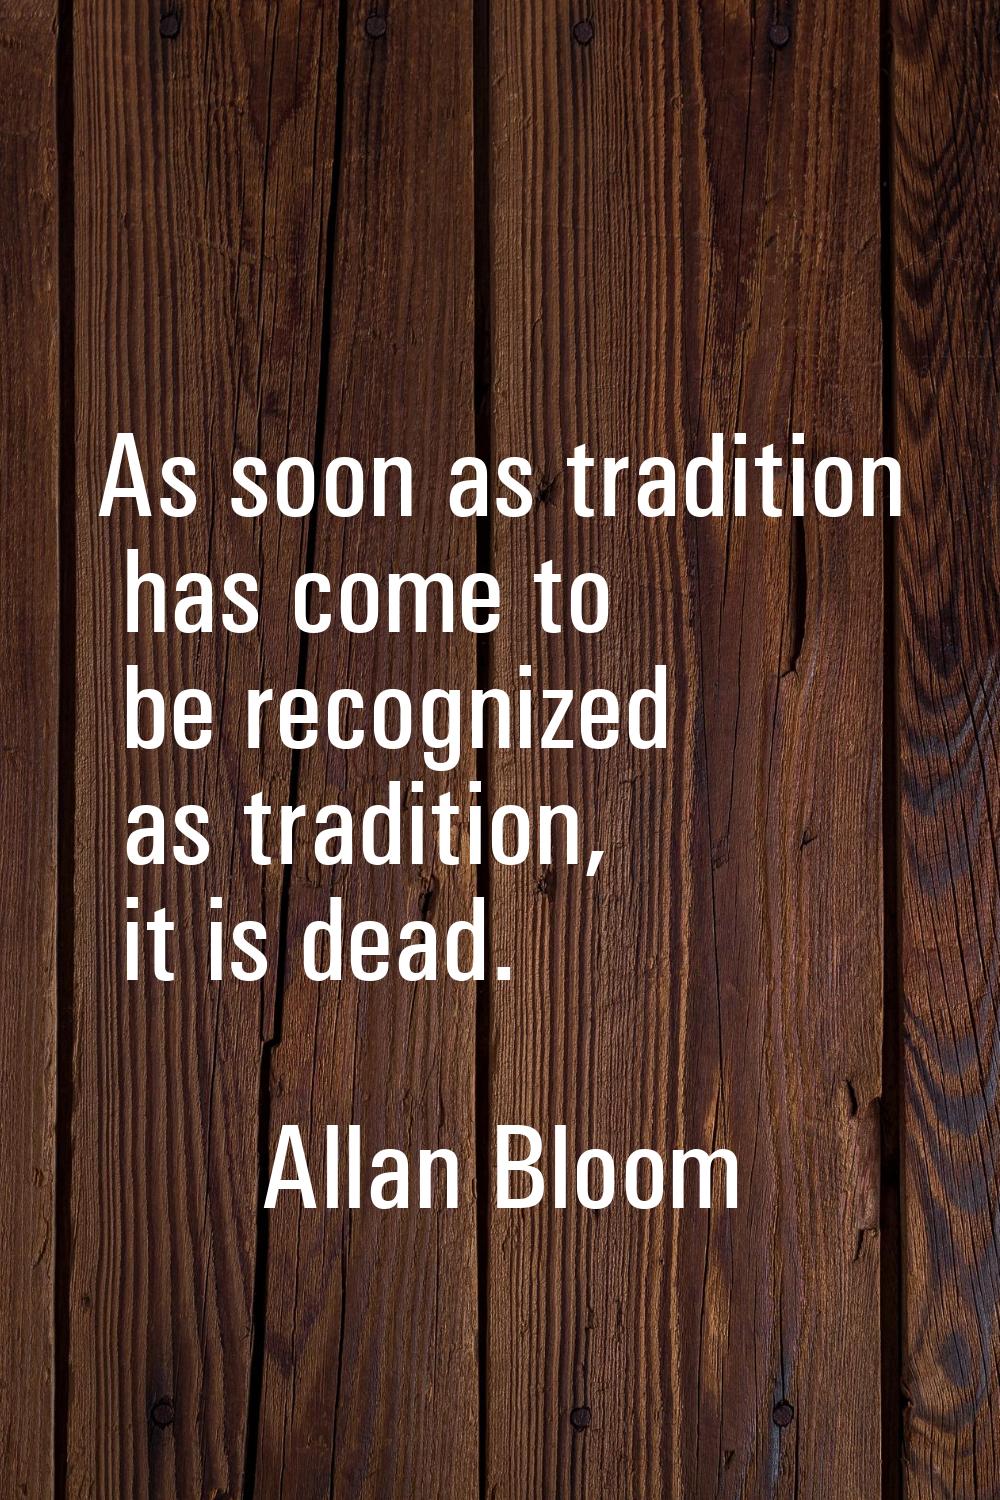 As soon as tradition has come to be recognized as tradition, it is dead.